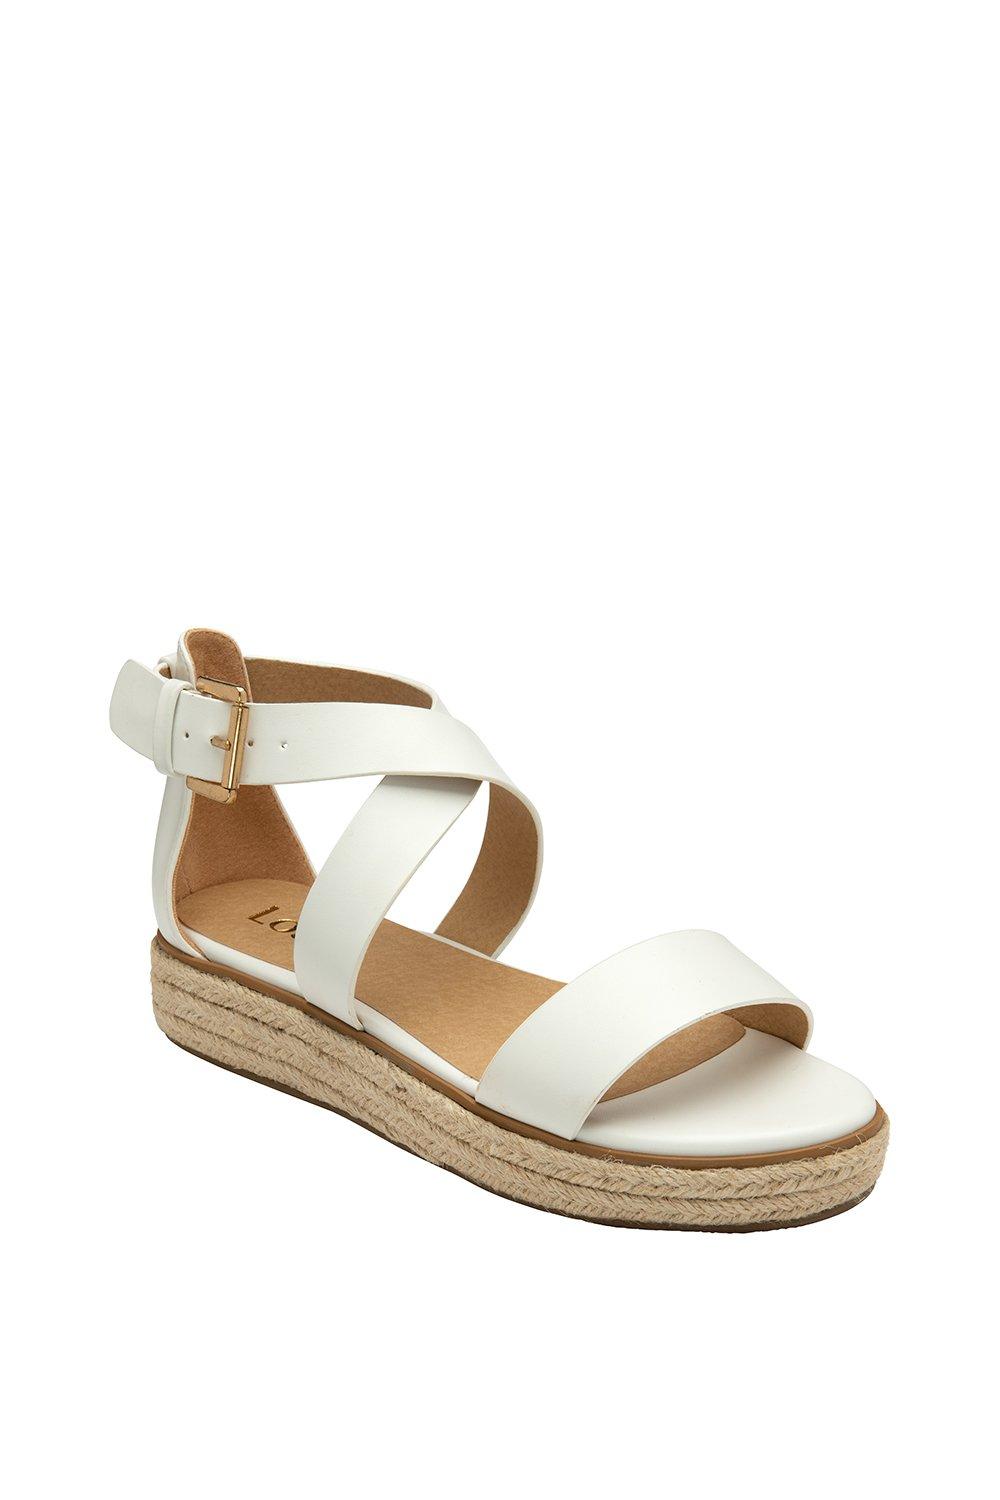 Sandals | 'Catalina' Ankle Strap Sandals | Lotus